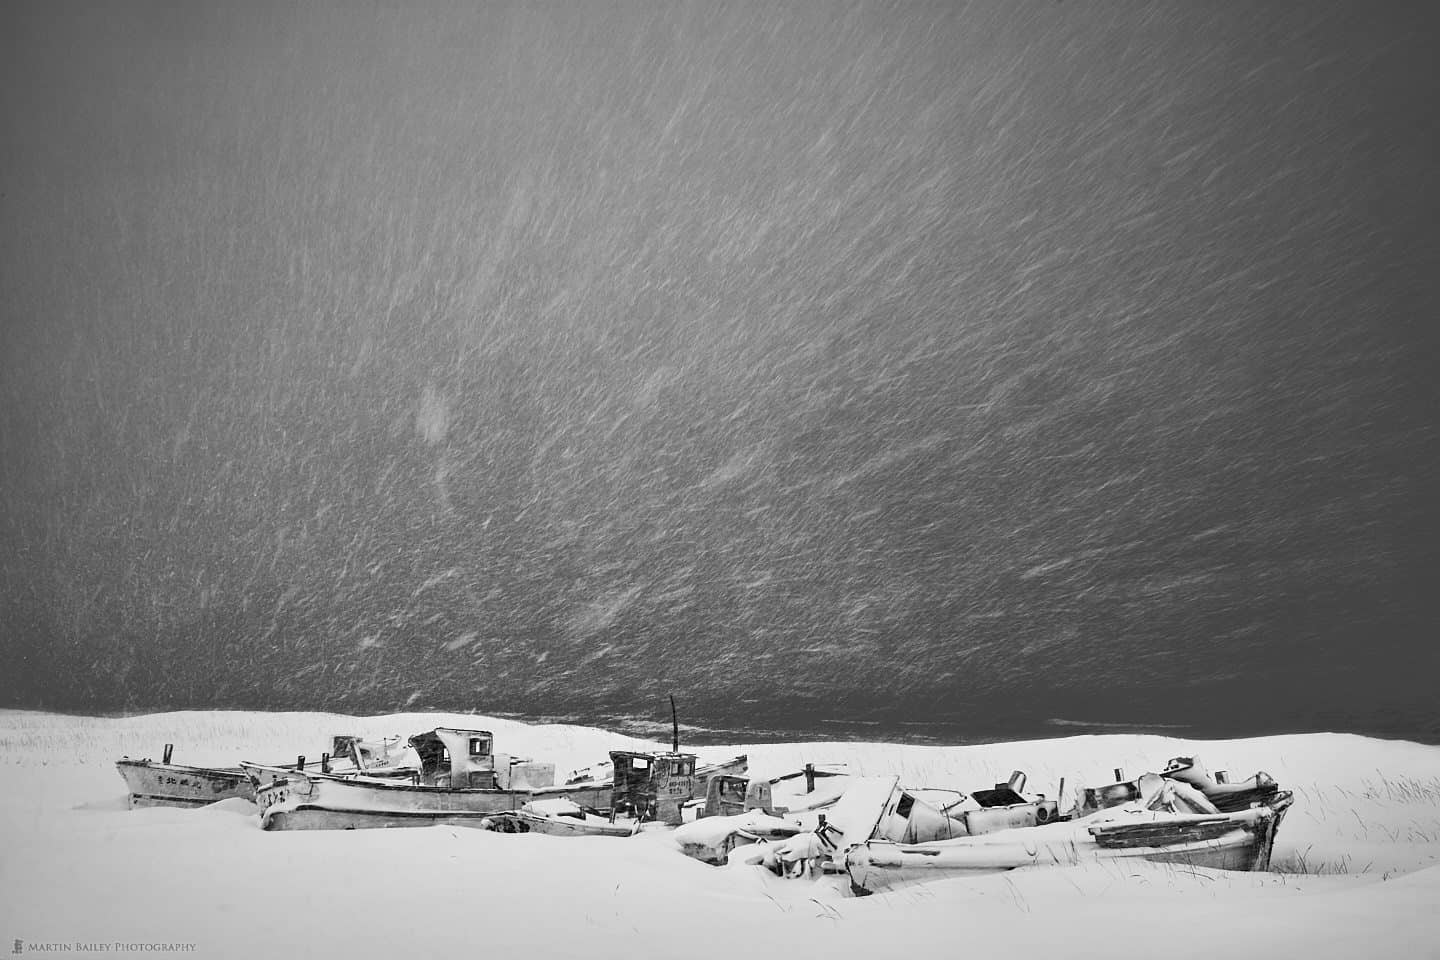 Boat Graveyard in Driving Snow